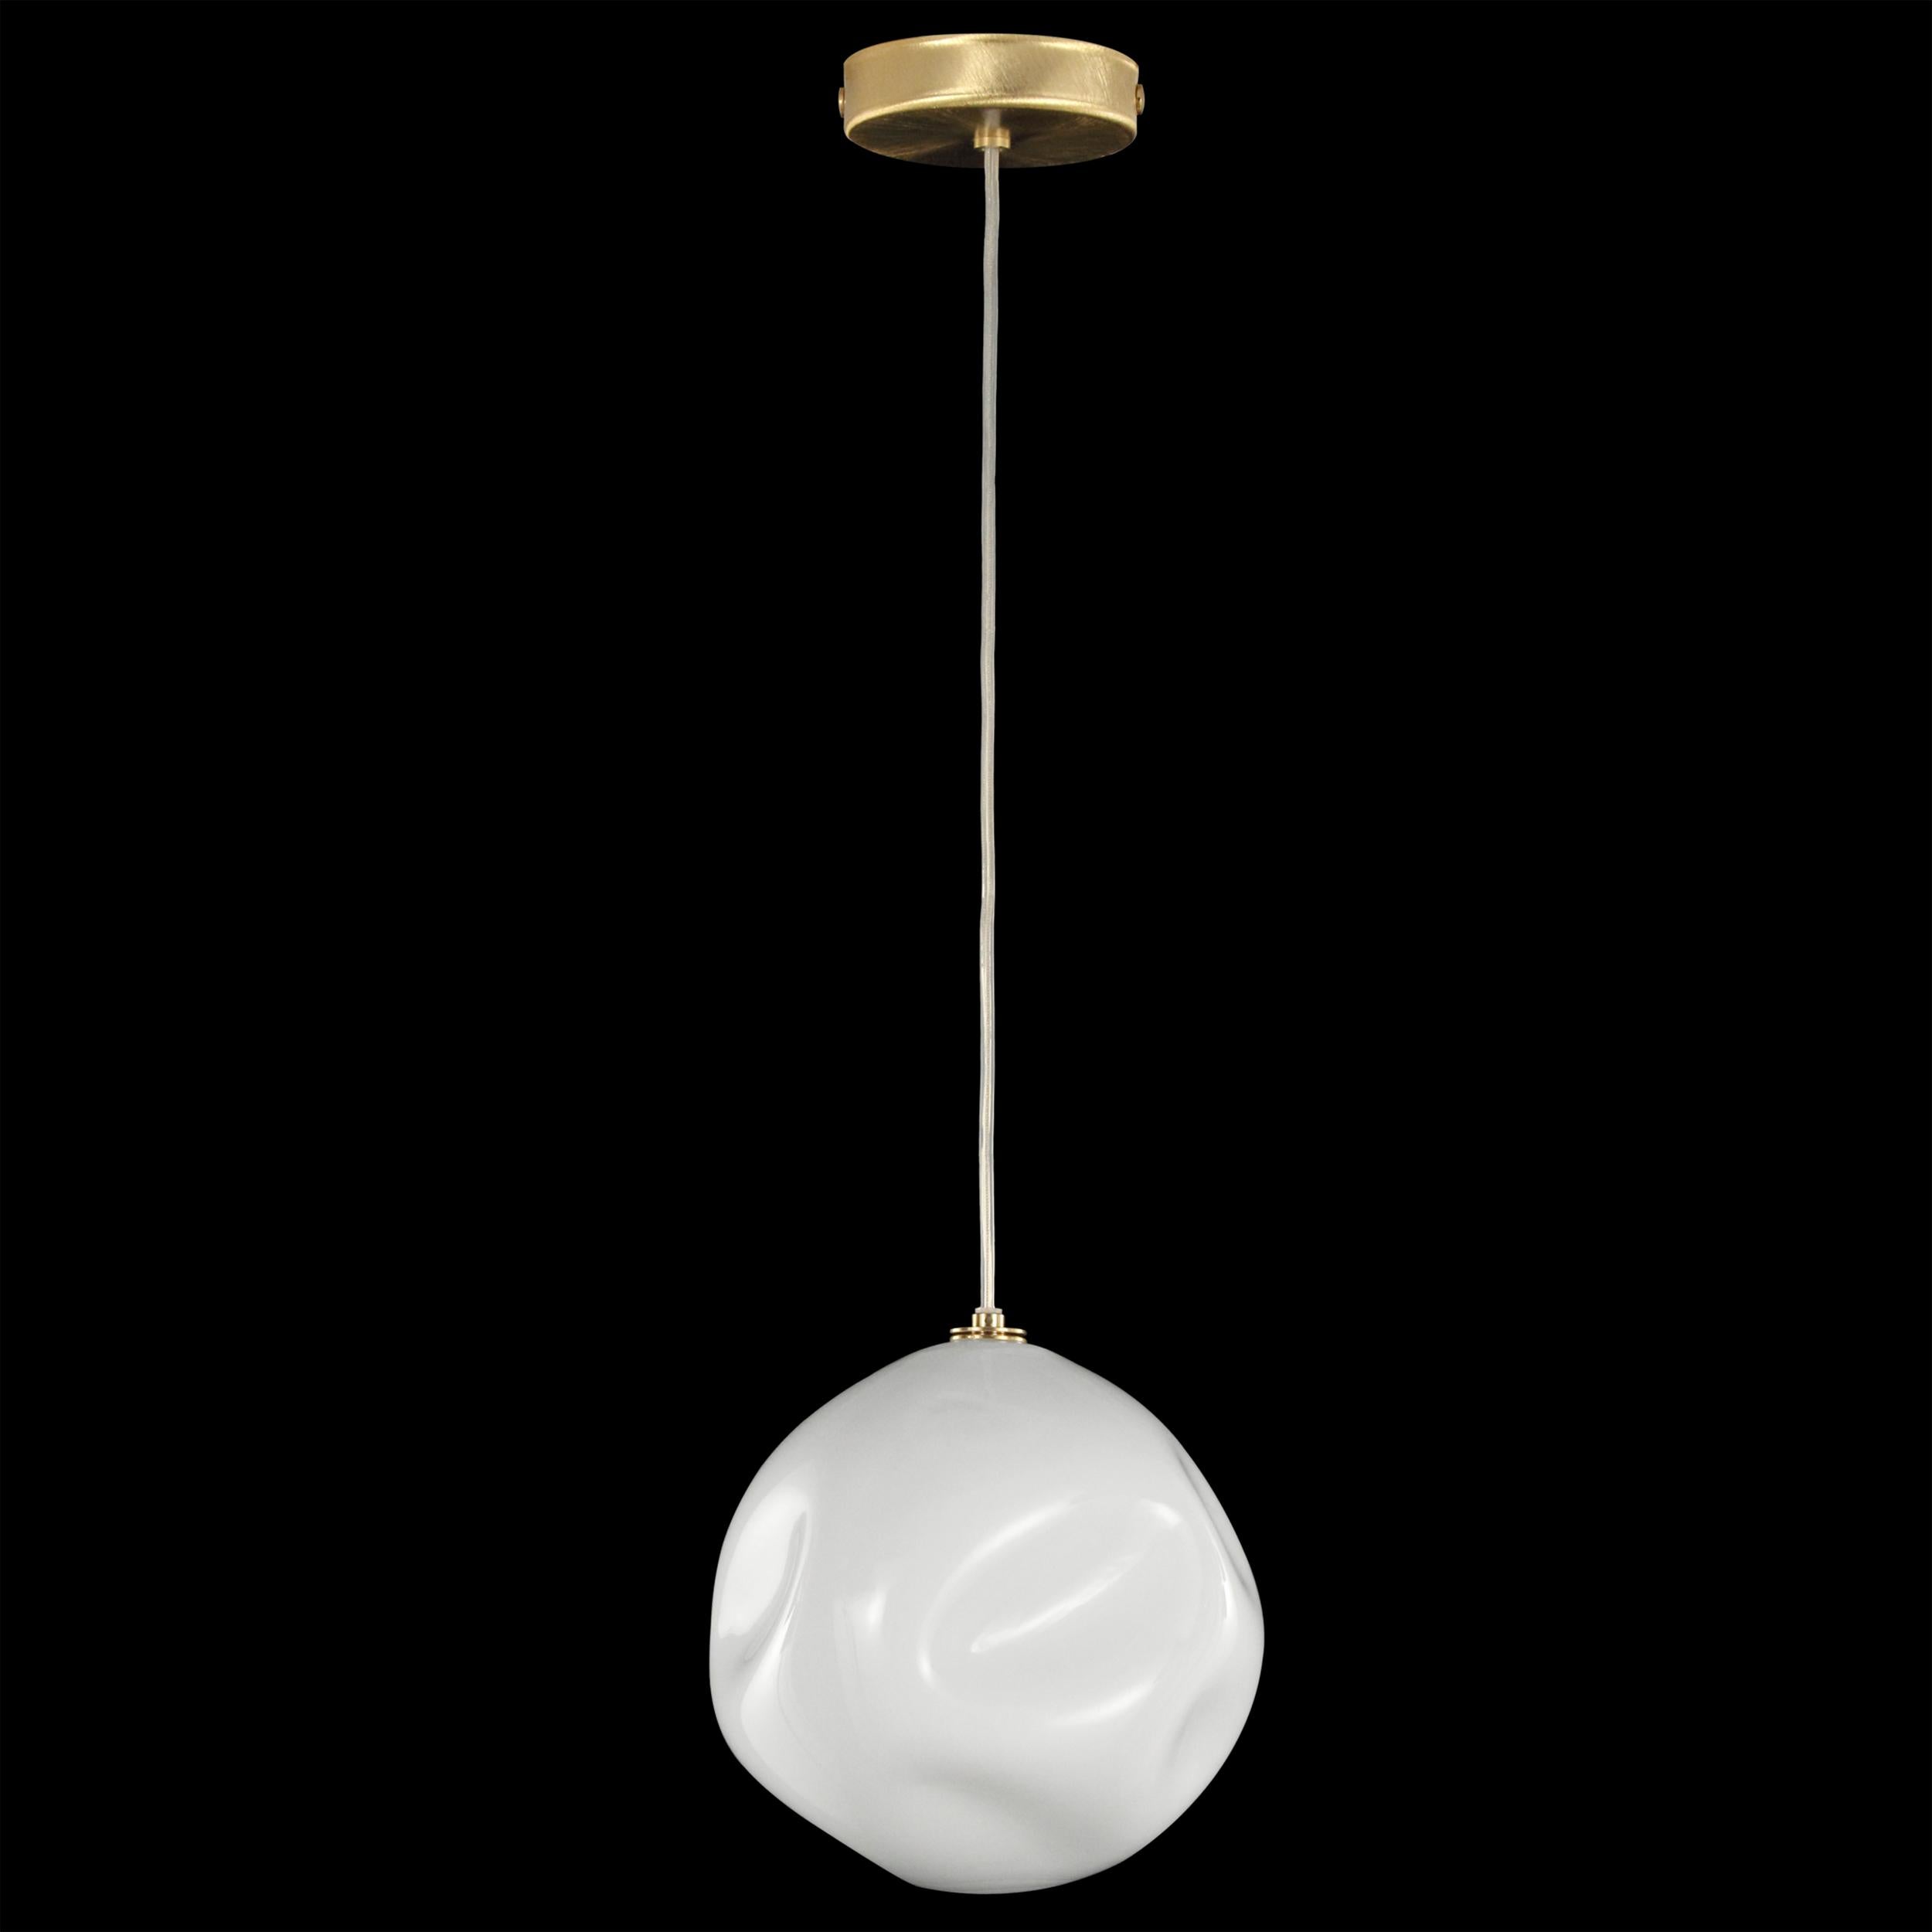 Artistic suspension lamp, glass sphere in white Murano glass.
Elegant and unmistakable, suggestive and poetical, soft and delicate are some of the adjectives that can be used to describe the blown glass ball chandelier Desafinado, our ceiling light